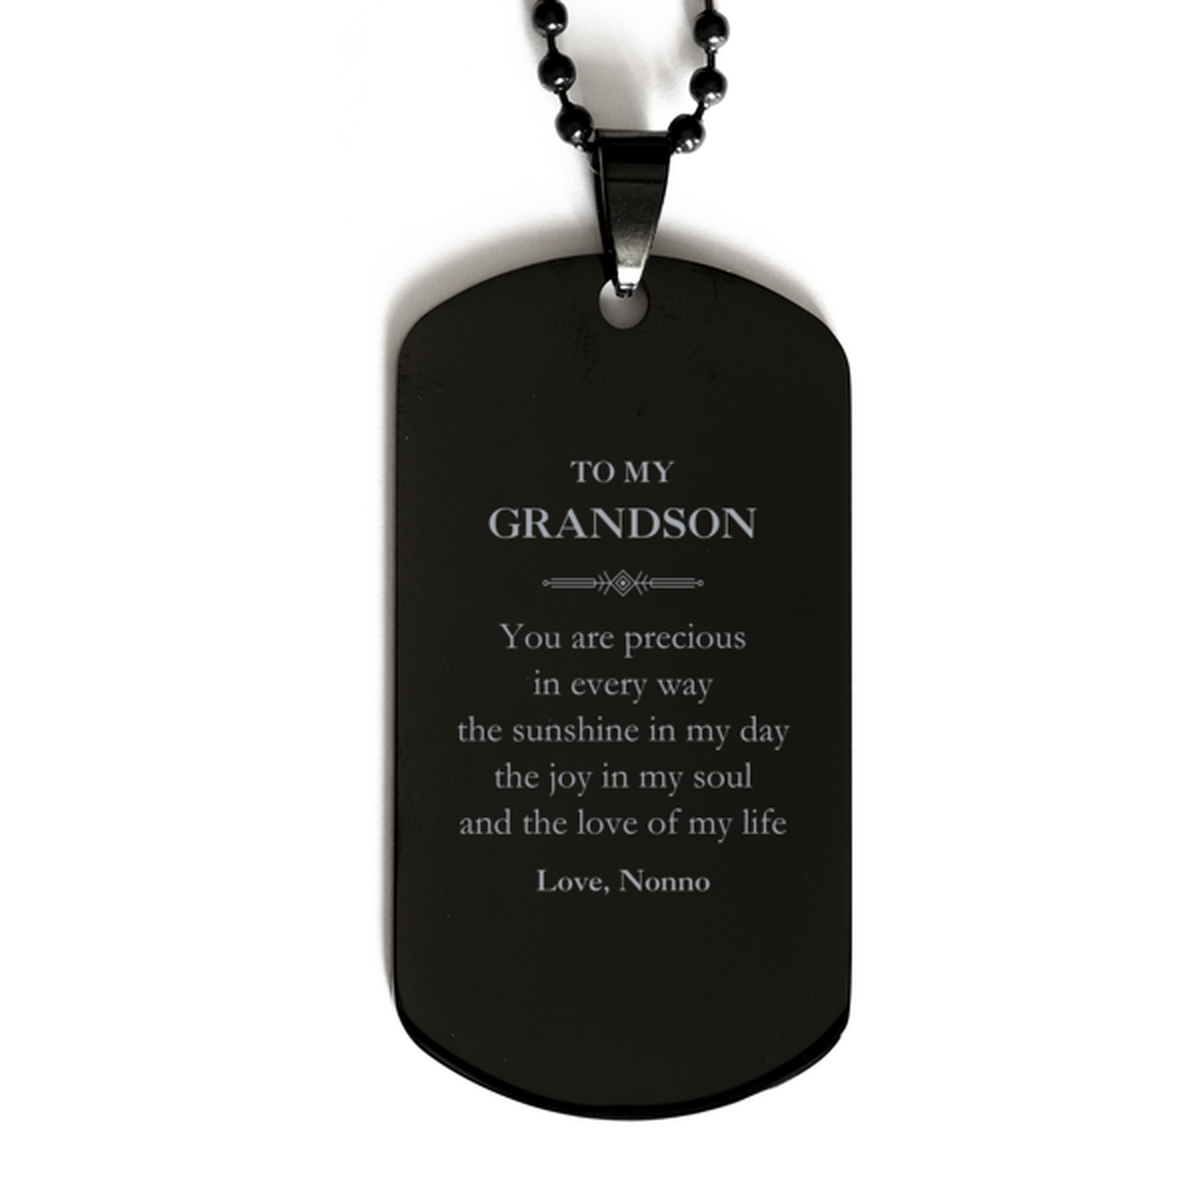 Graduation Gifts for Grandson Black Dog Tag Present from Nonno, Christmas Grandson Birthday Gifts Grandson You are precious in every way the sunshine in my day. Love, Nonno